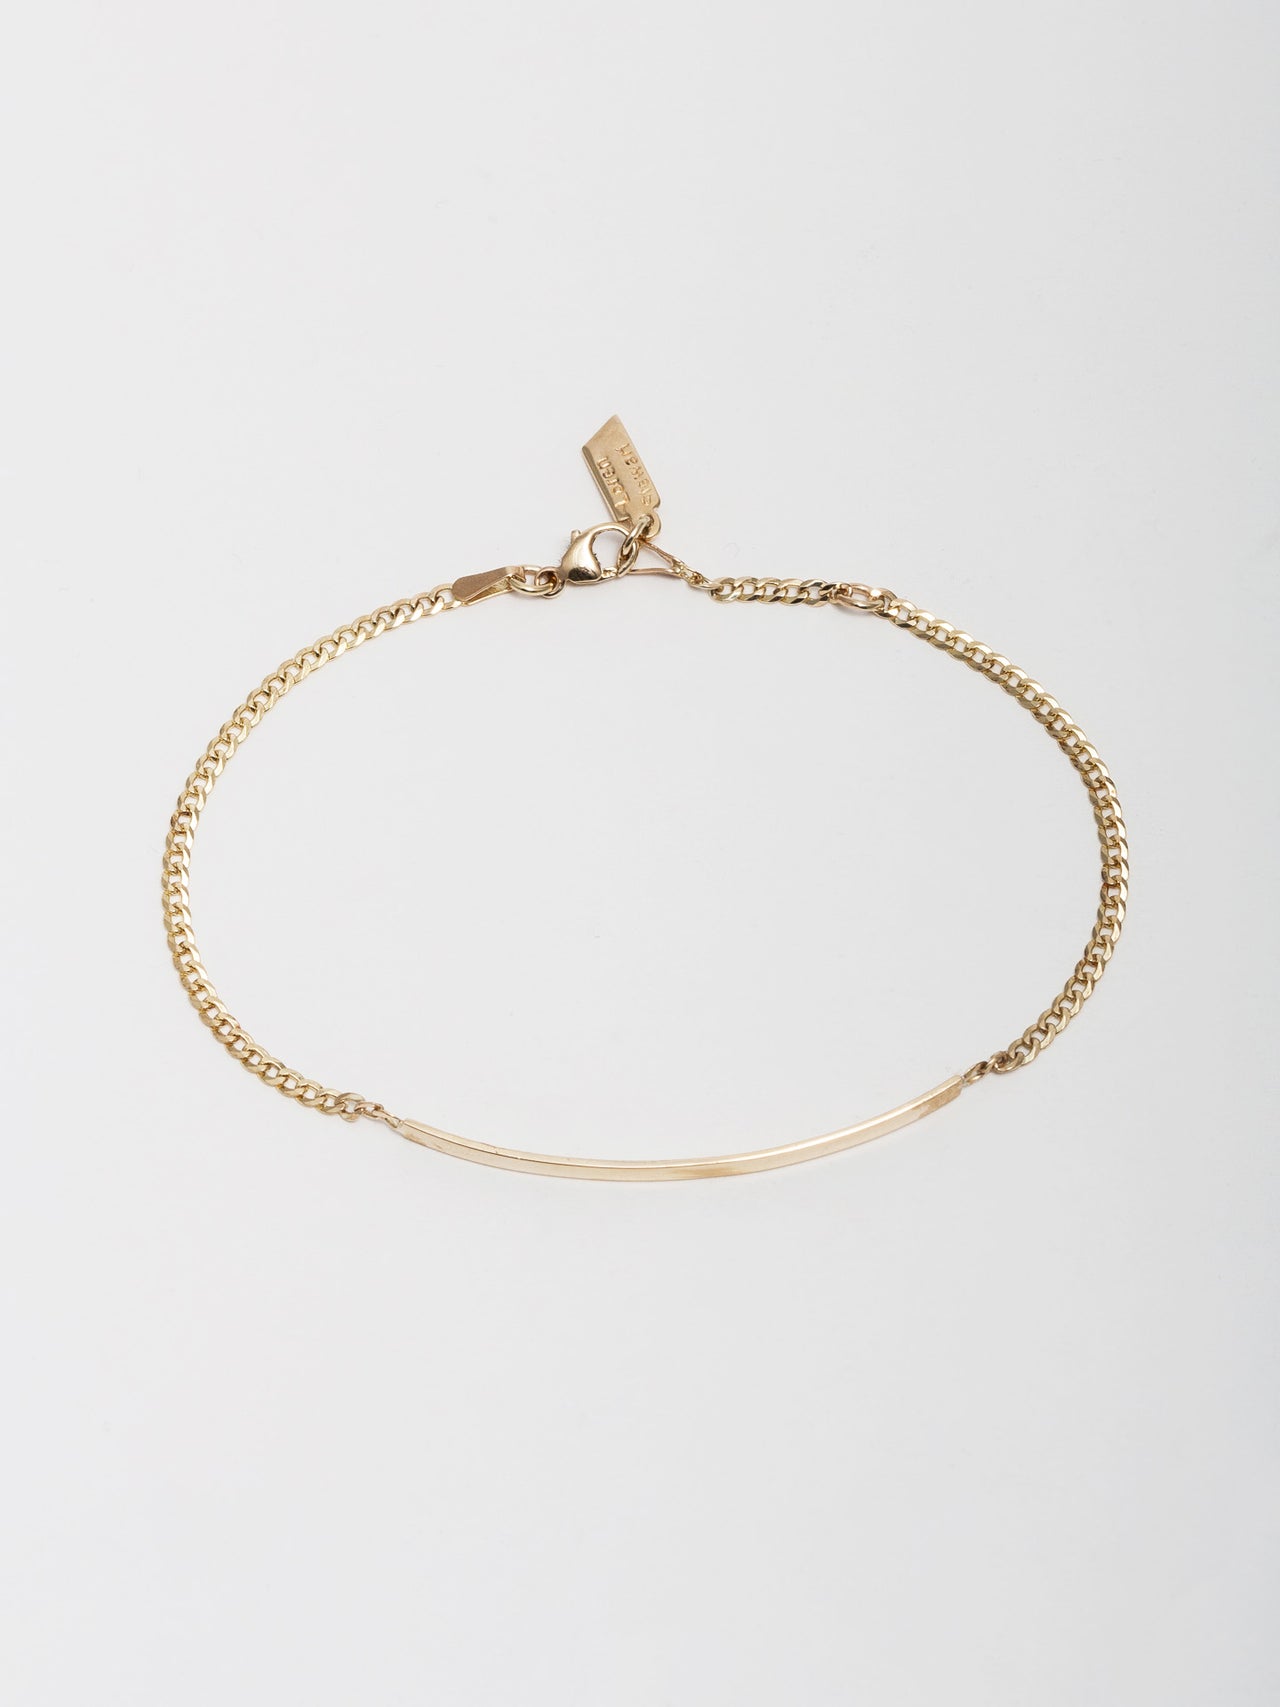 14kt Yellow Gold Eastsider ID Bracelet pictured on light grey background from above.